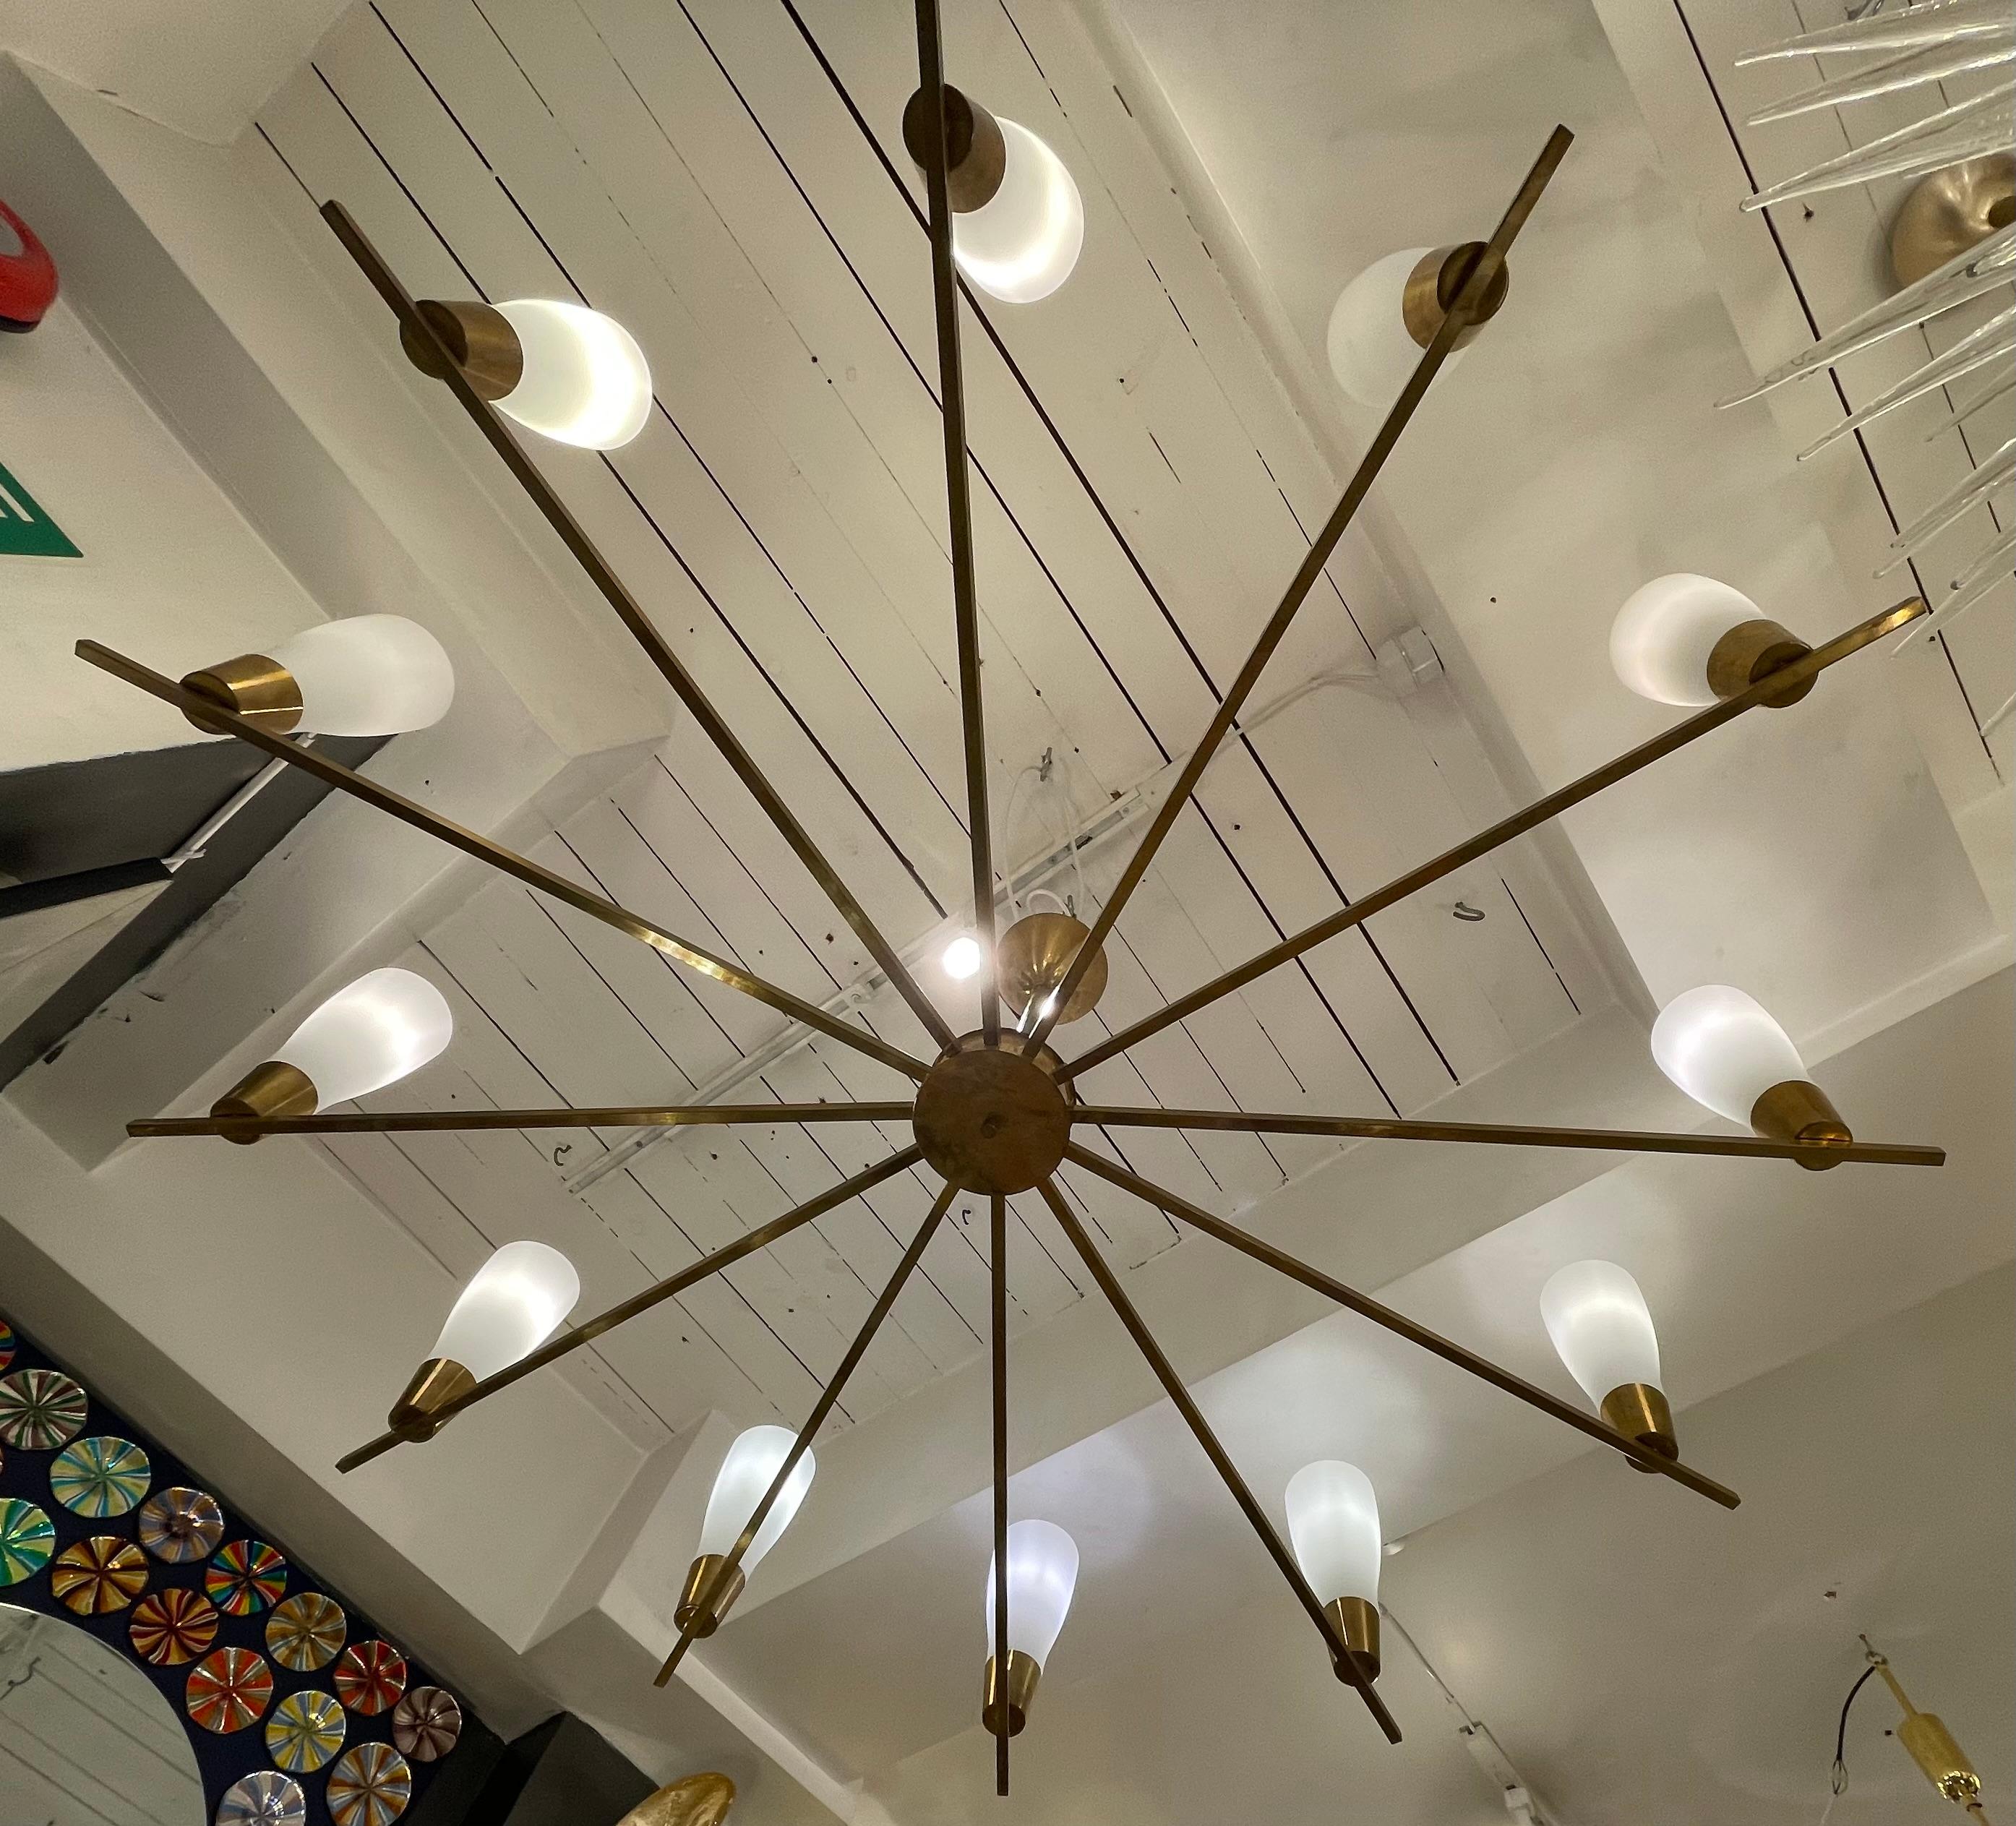 Mid-20th Century Italian Modernist Chandelier in Brass with 12 Arms, circa 1960